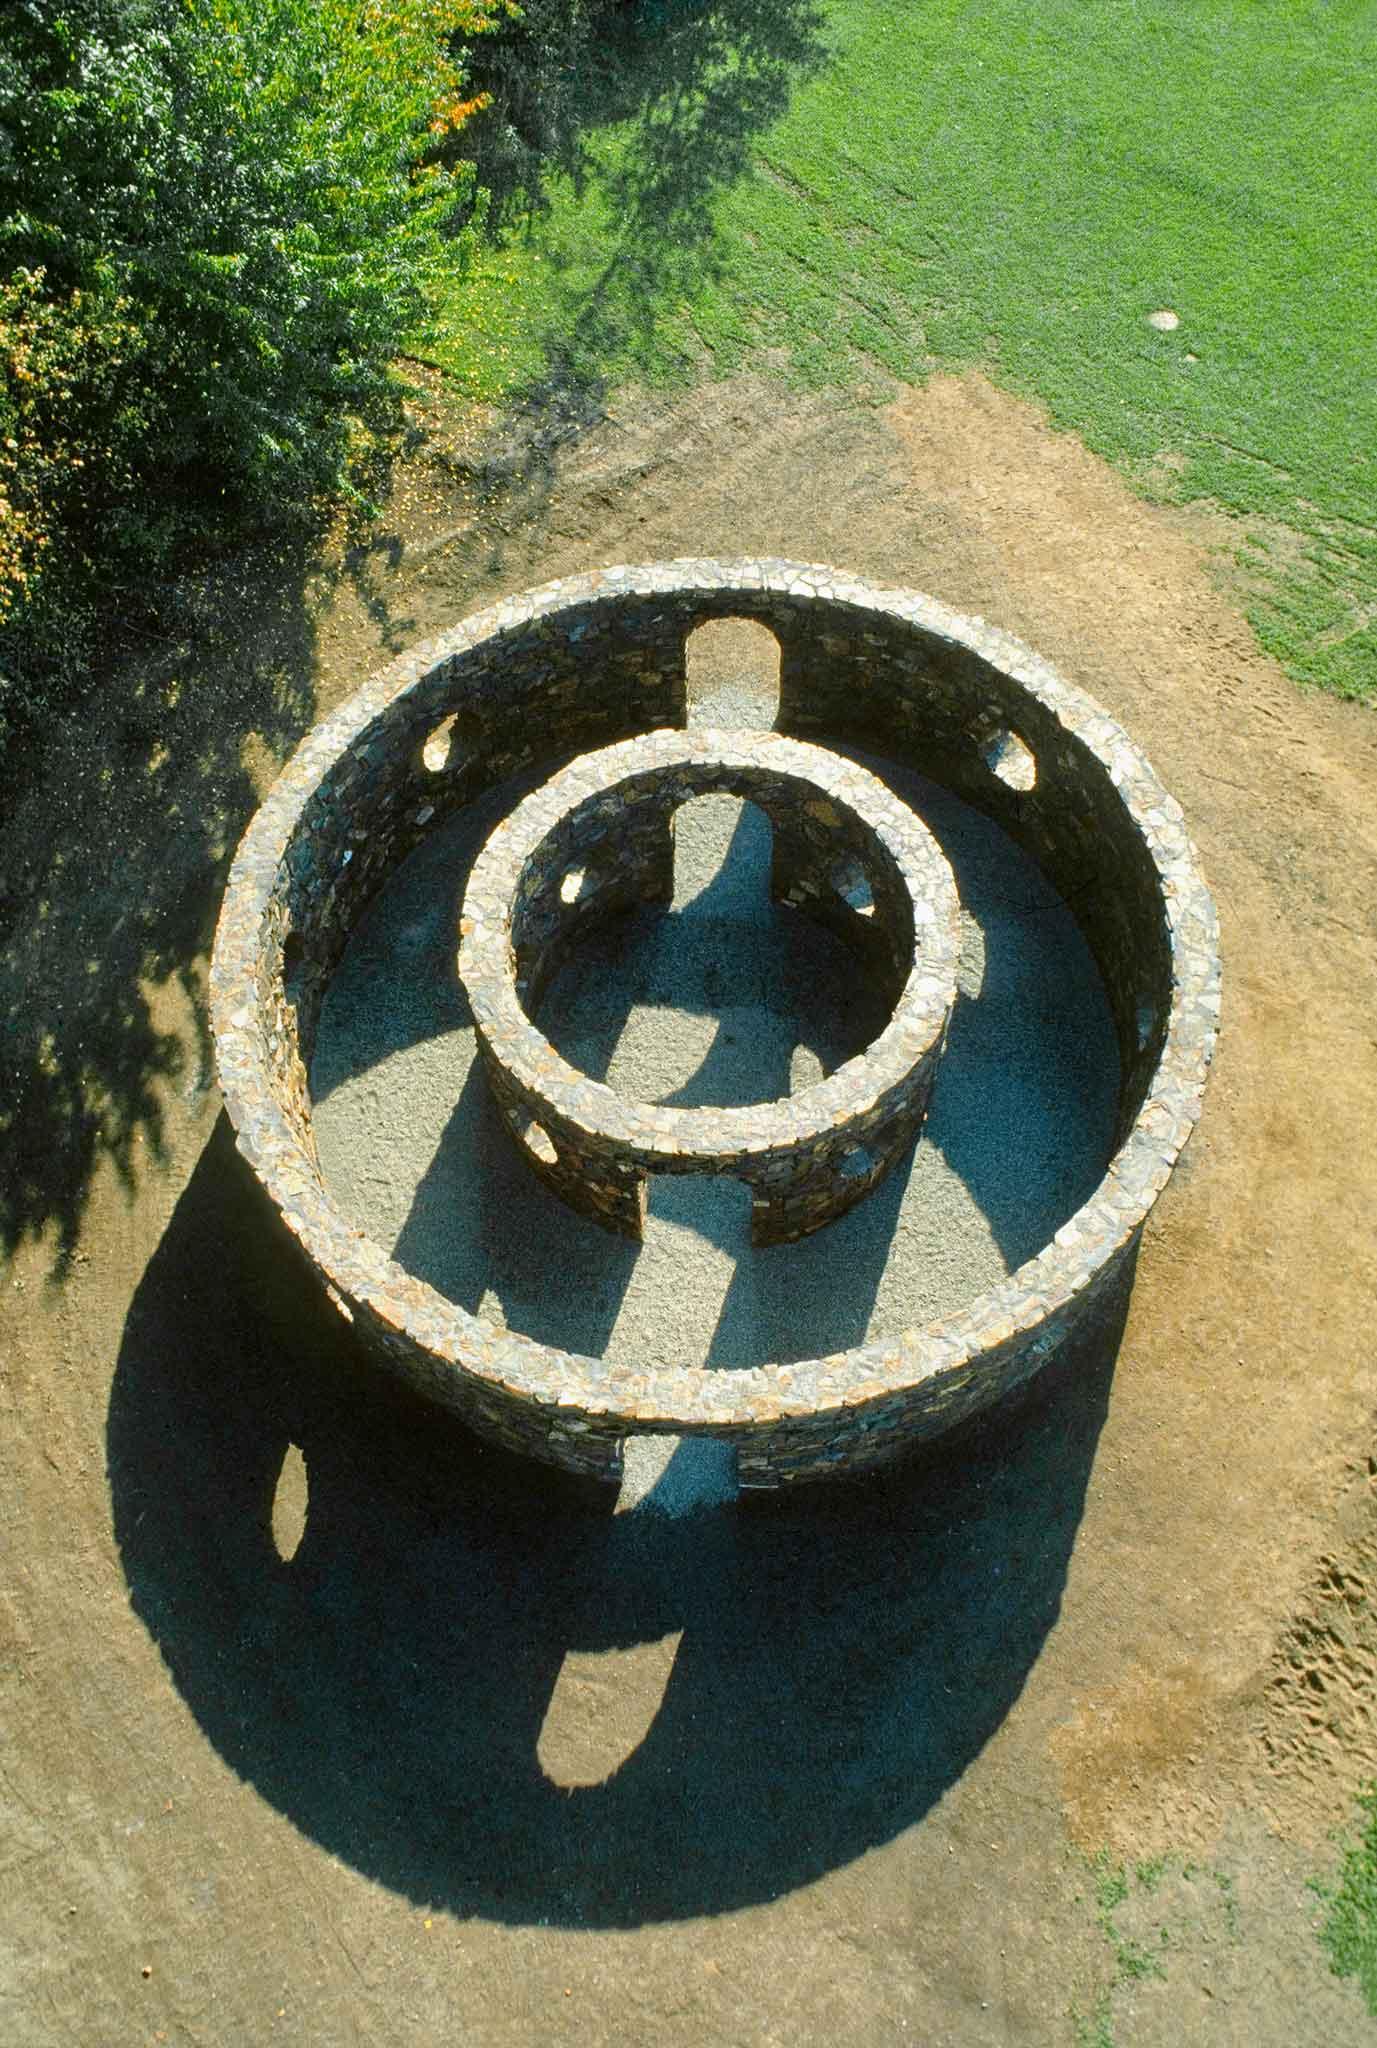 An aerial view of two concentric circular stone walls with the forest surrounding on the left and grass on the right.